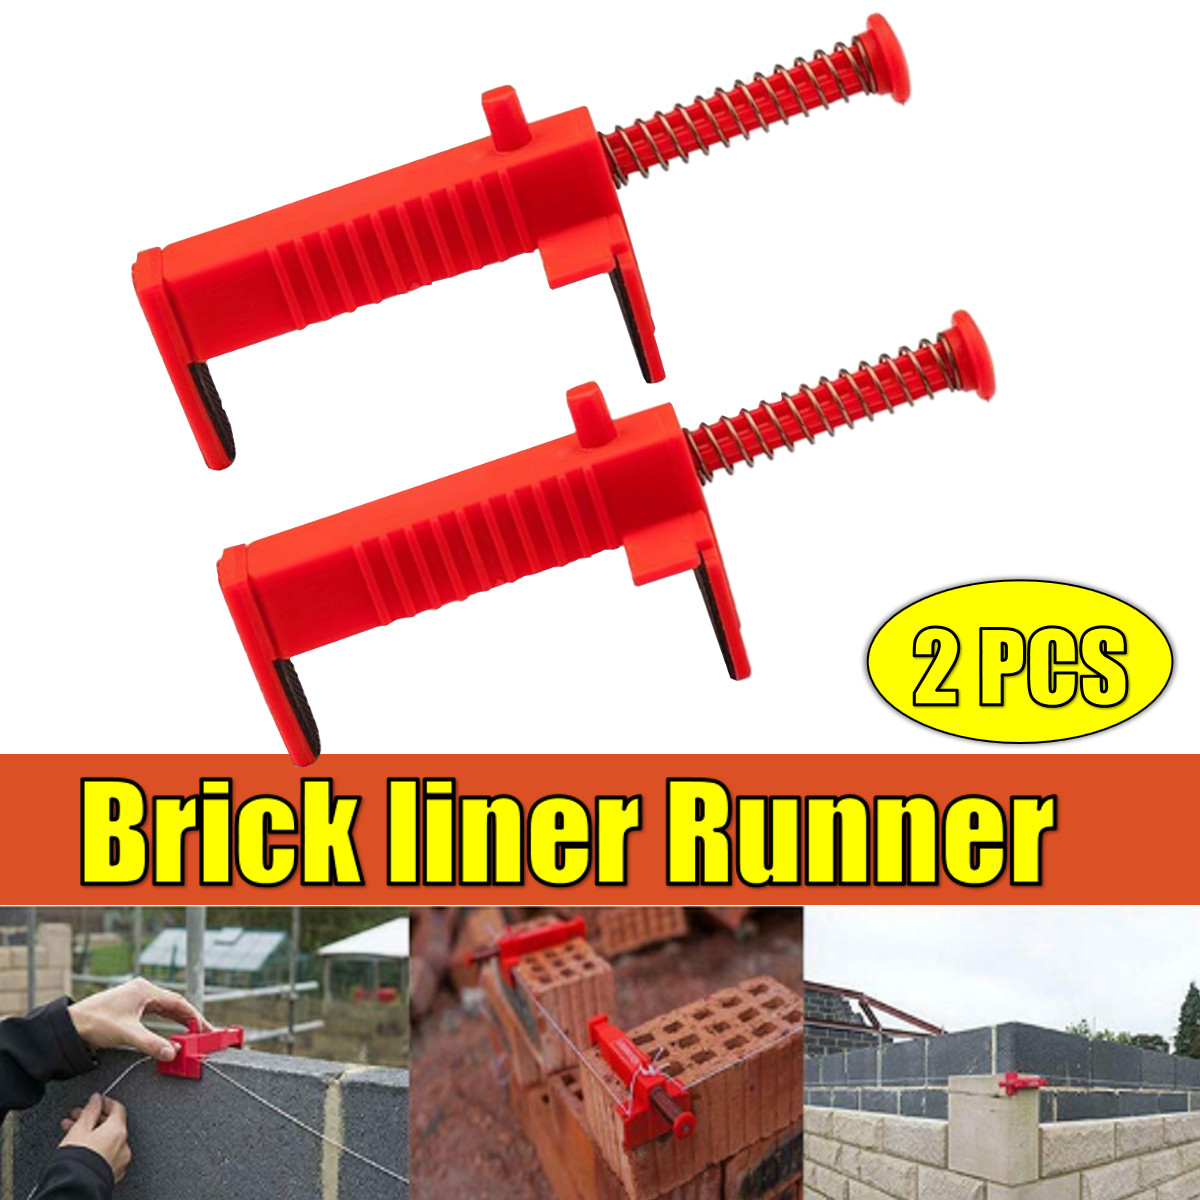 2pcs-Brick-Liner-Runner-Brick-Leveling-Cable-Measuring-Tools-Kit-for-Masons-Engineering-2P-Wire-1596209-1